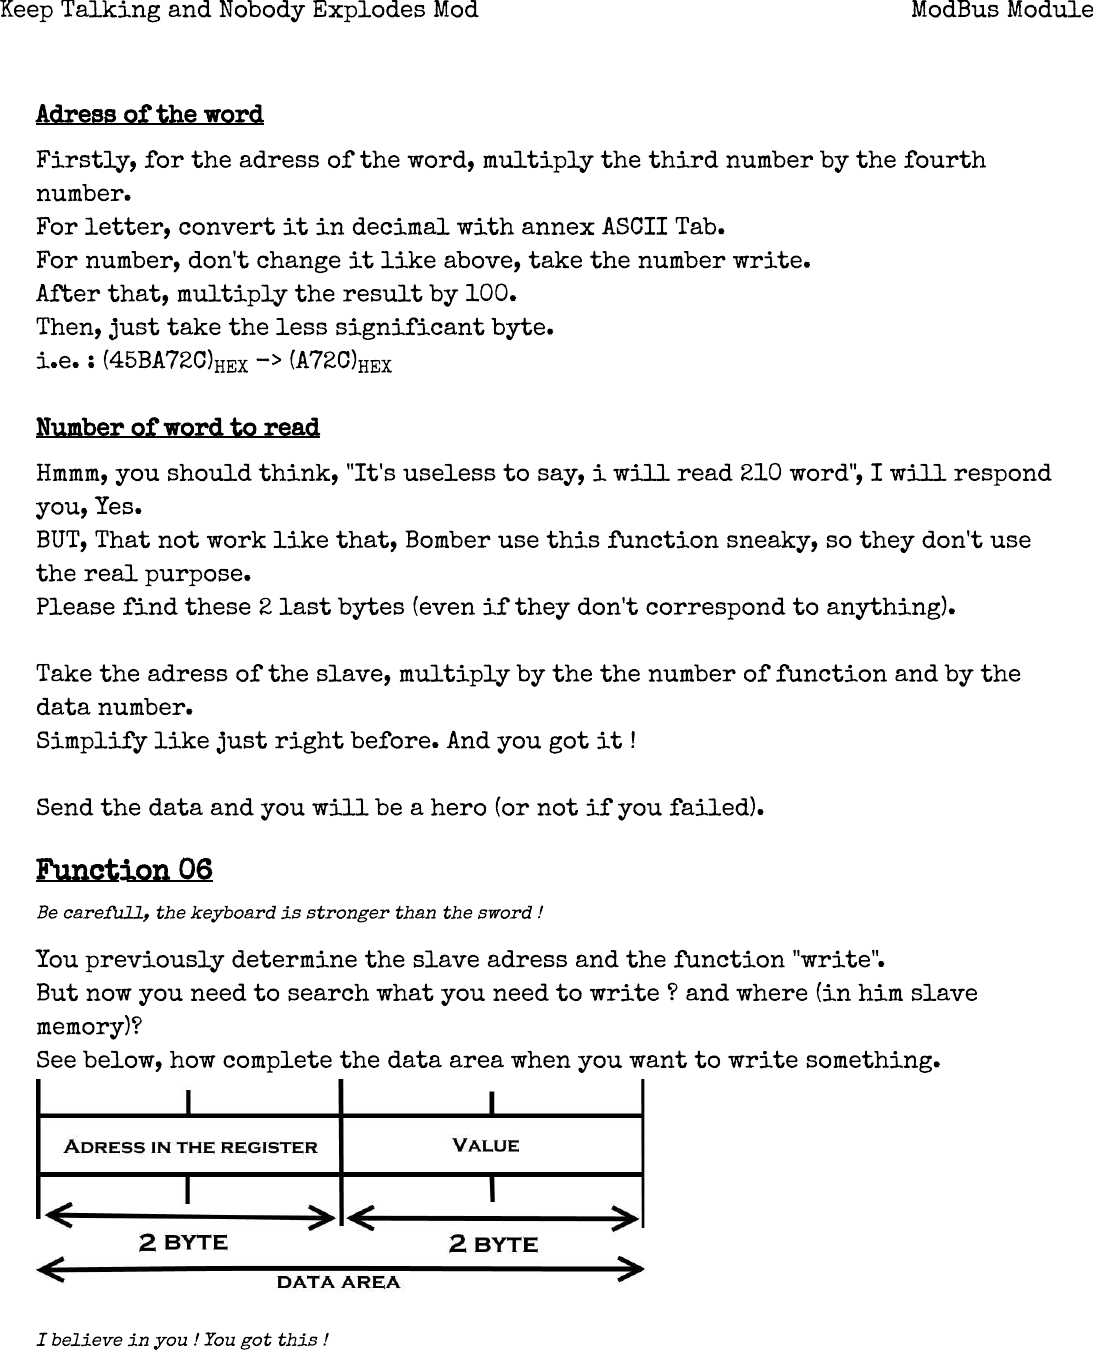 Page 3 of 5 - ModBus Module â•ﬂ Keep Talking And Nobody Explodes Mod Bus Manual PDF V1.0